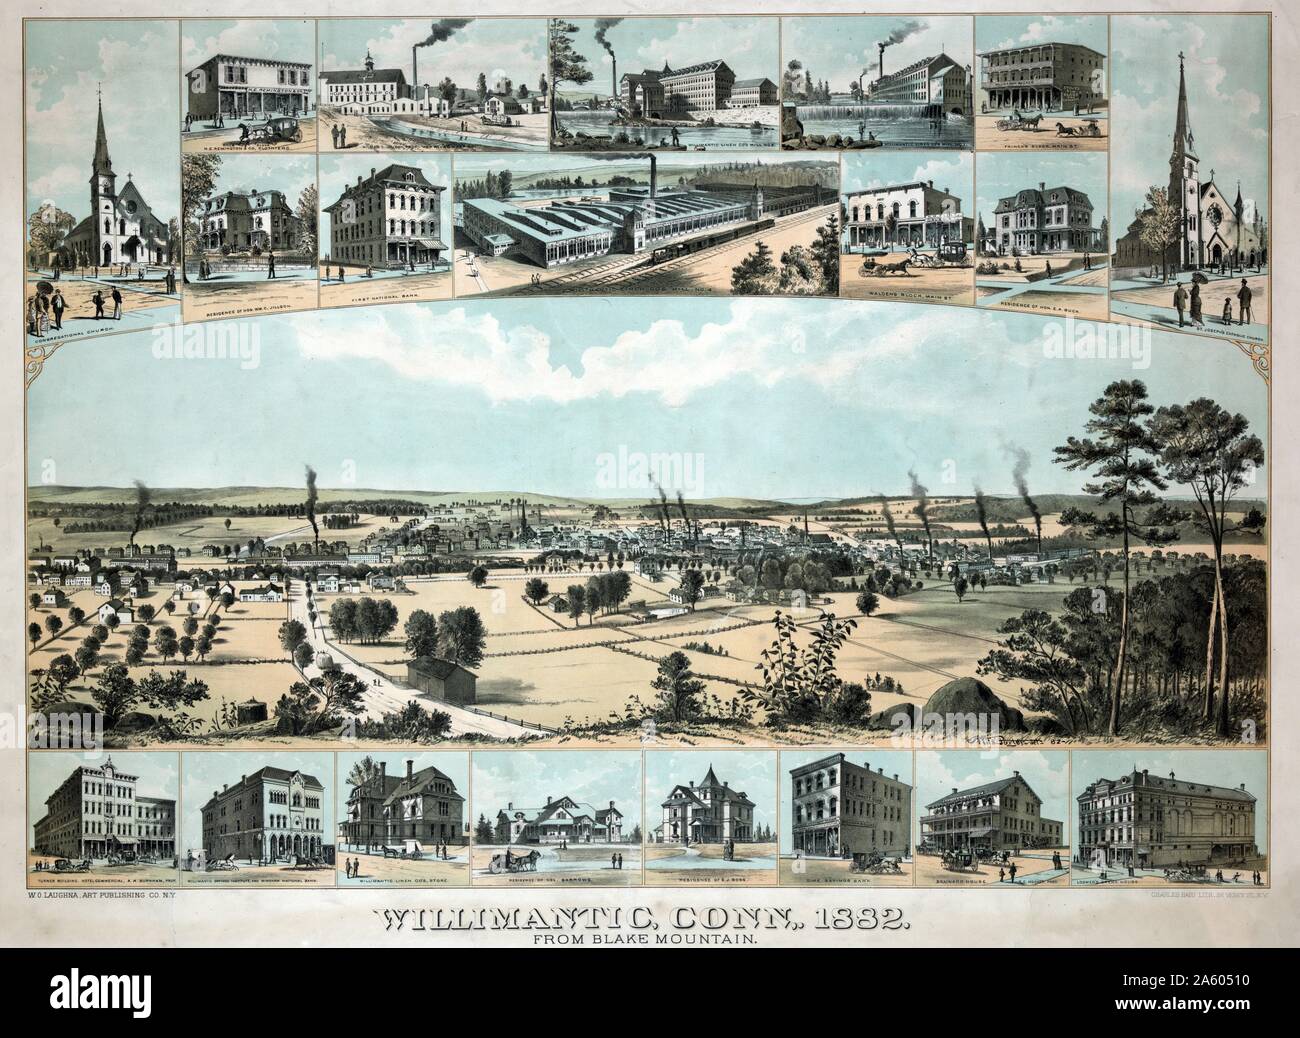 Willimantic; Connecticut; 1882 From Blake Mountain by Wills Porter; 1882. Bird's-eye view of Willimantic; Connecticut; vignettes of prominent commercial; religious; and residential buildings along top and bottom borders. Stock Photo